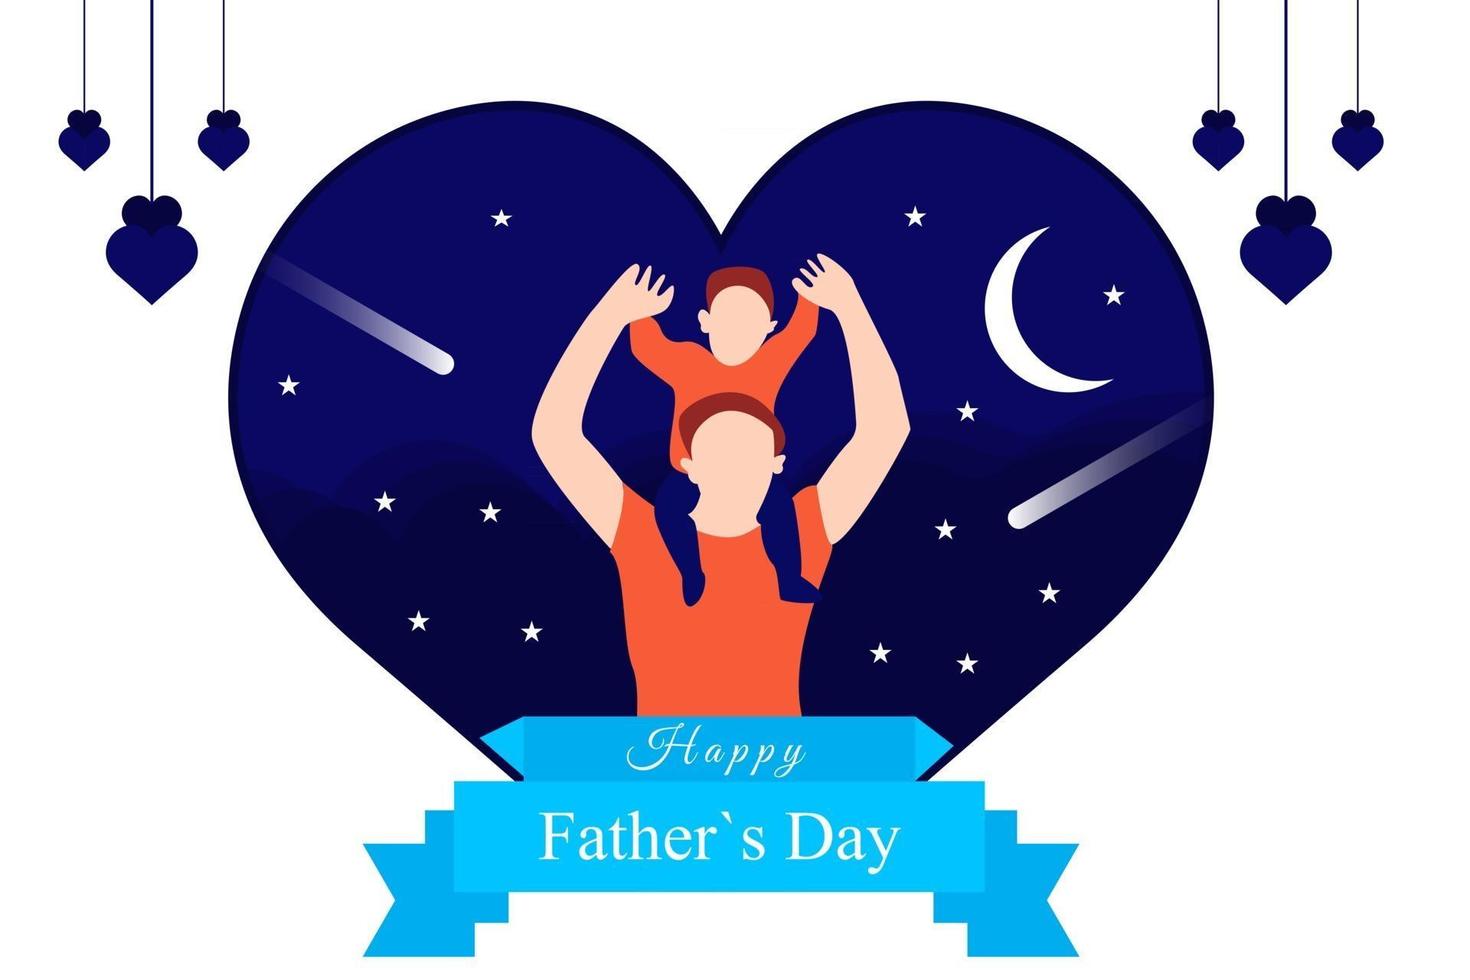 Fathers Day illustration background vector